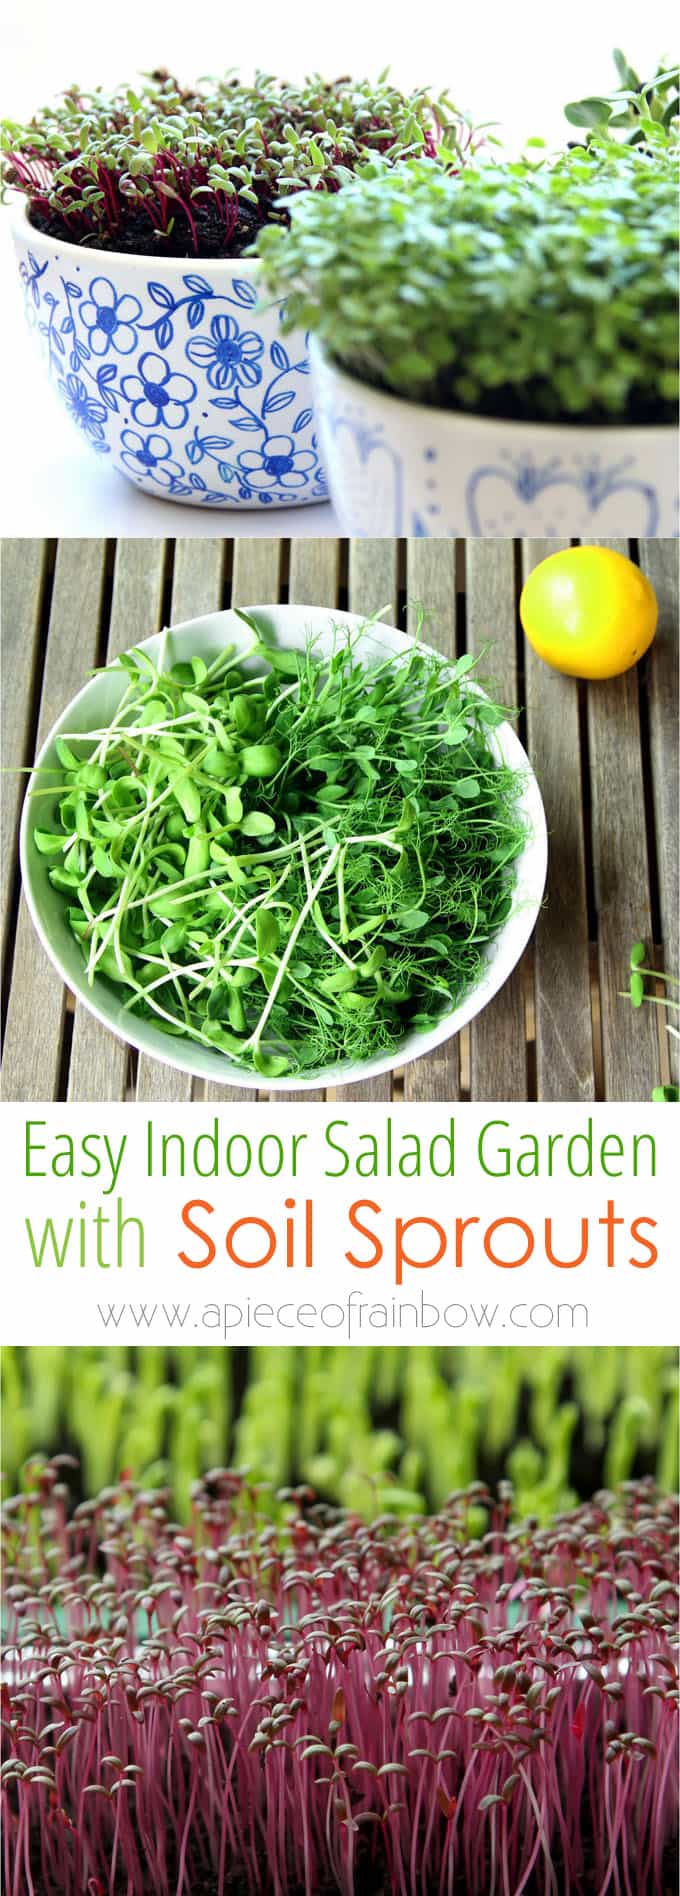 Grow an Indoor Salad Garden with Soil Sprouts